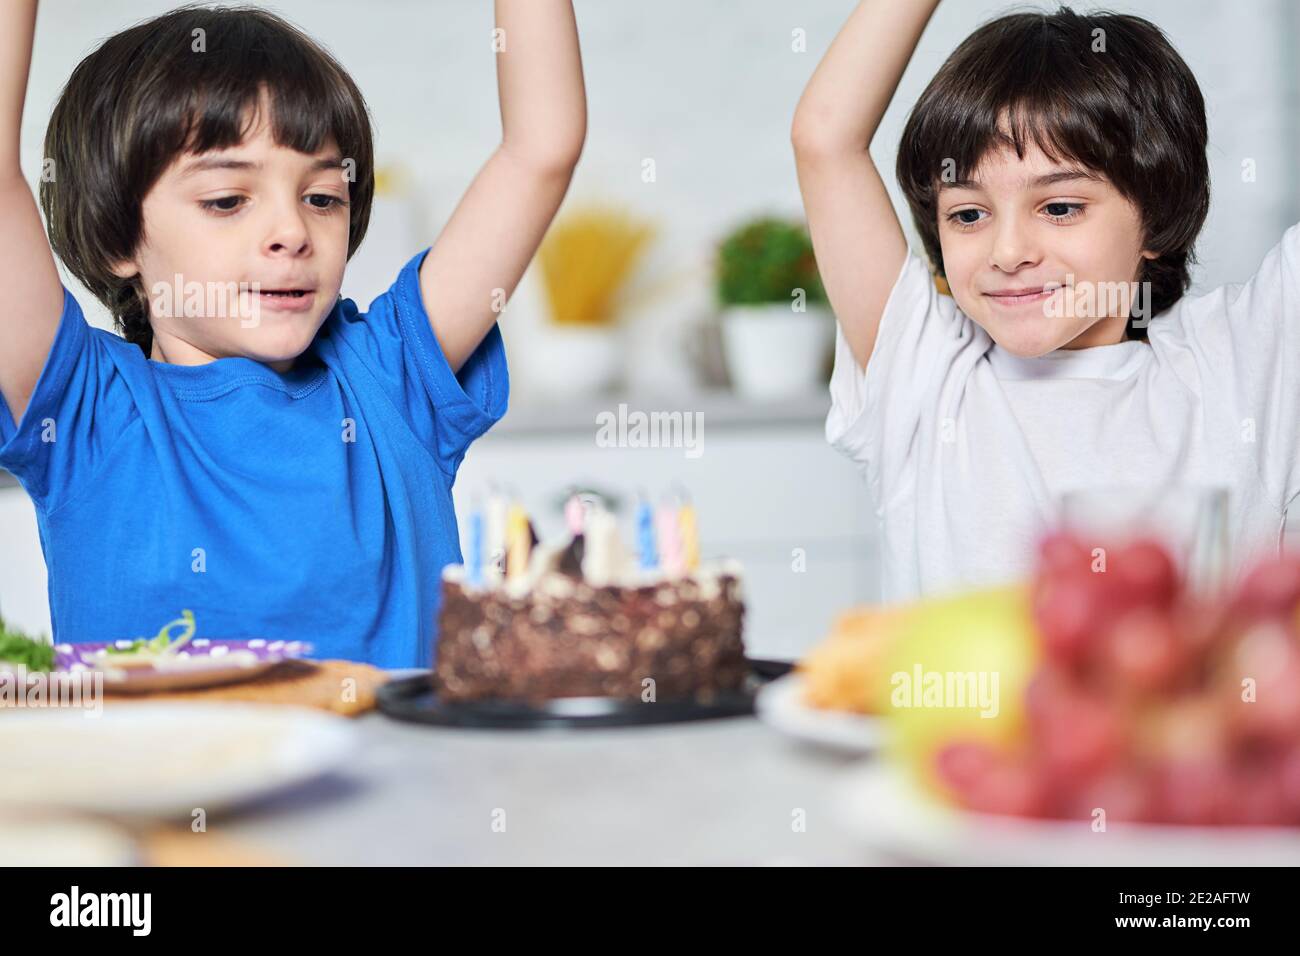 Excited little hispanic twins looking happy after blowing candles on a birthday cake. Children celebrating birthday together with parents at home. Selective focus on kids Stock Photo